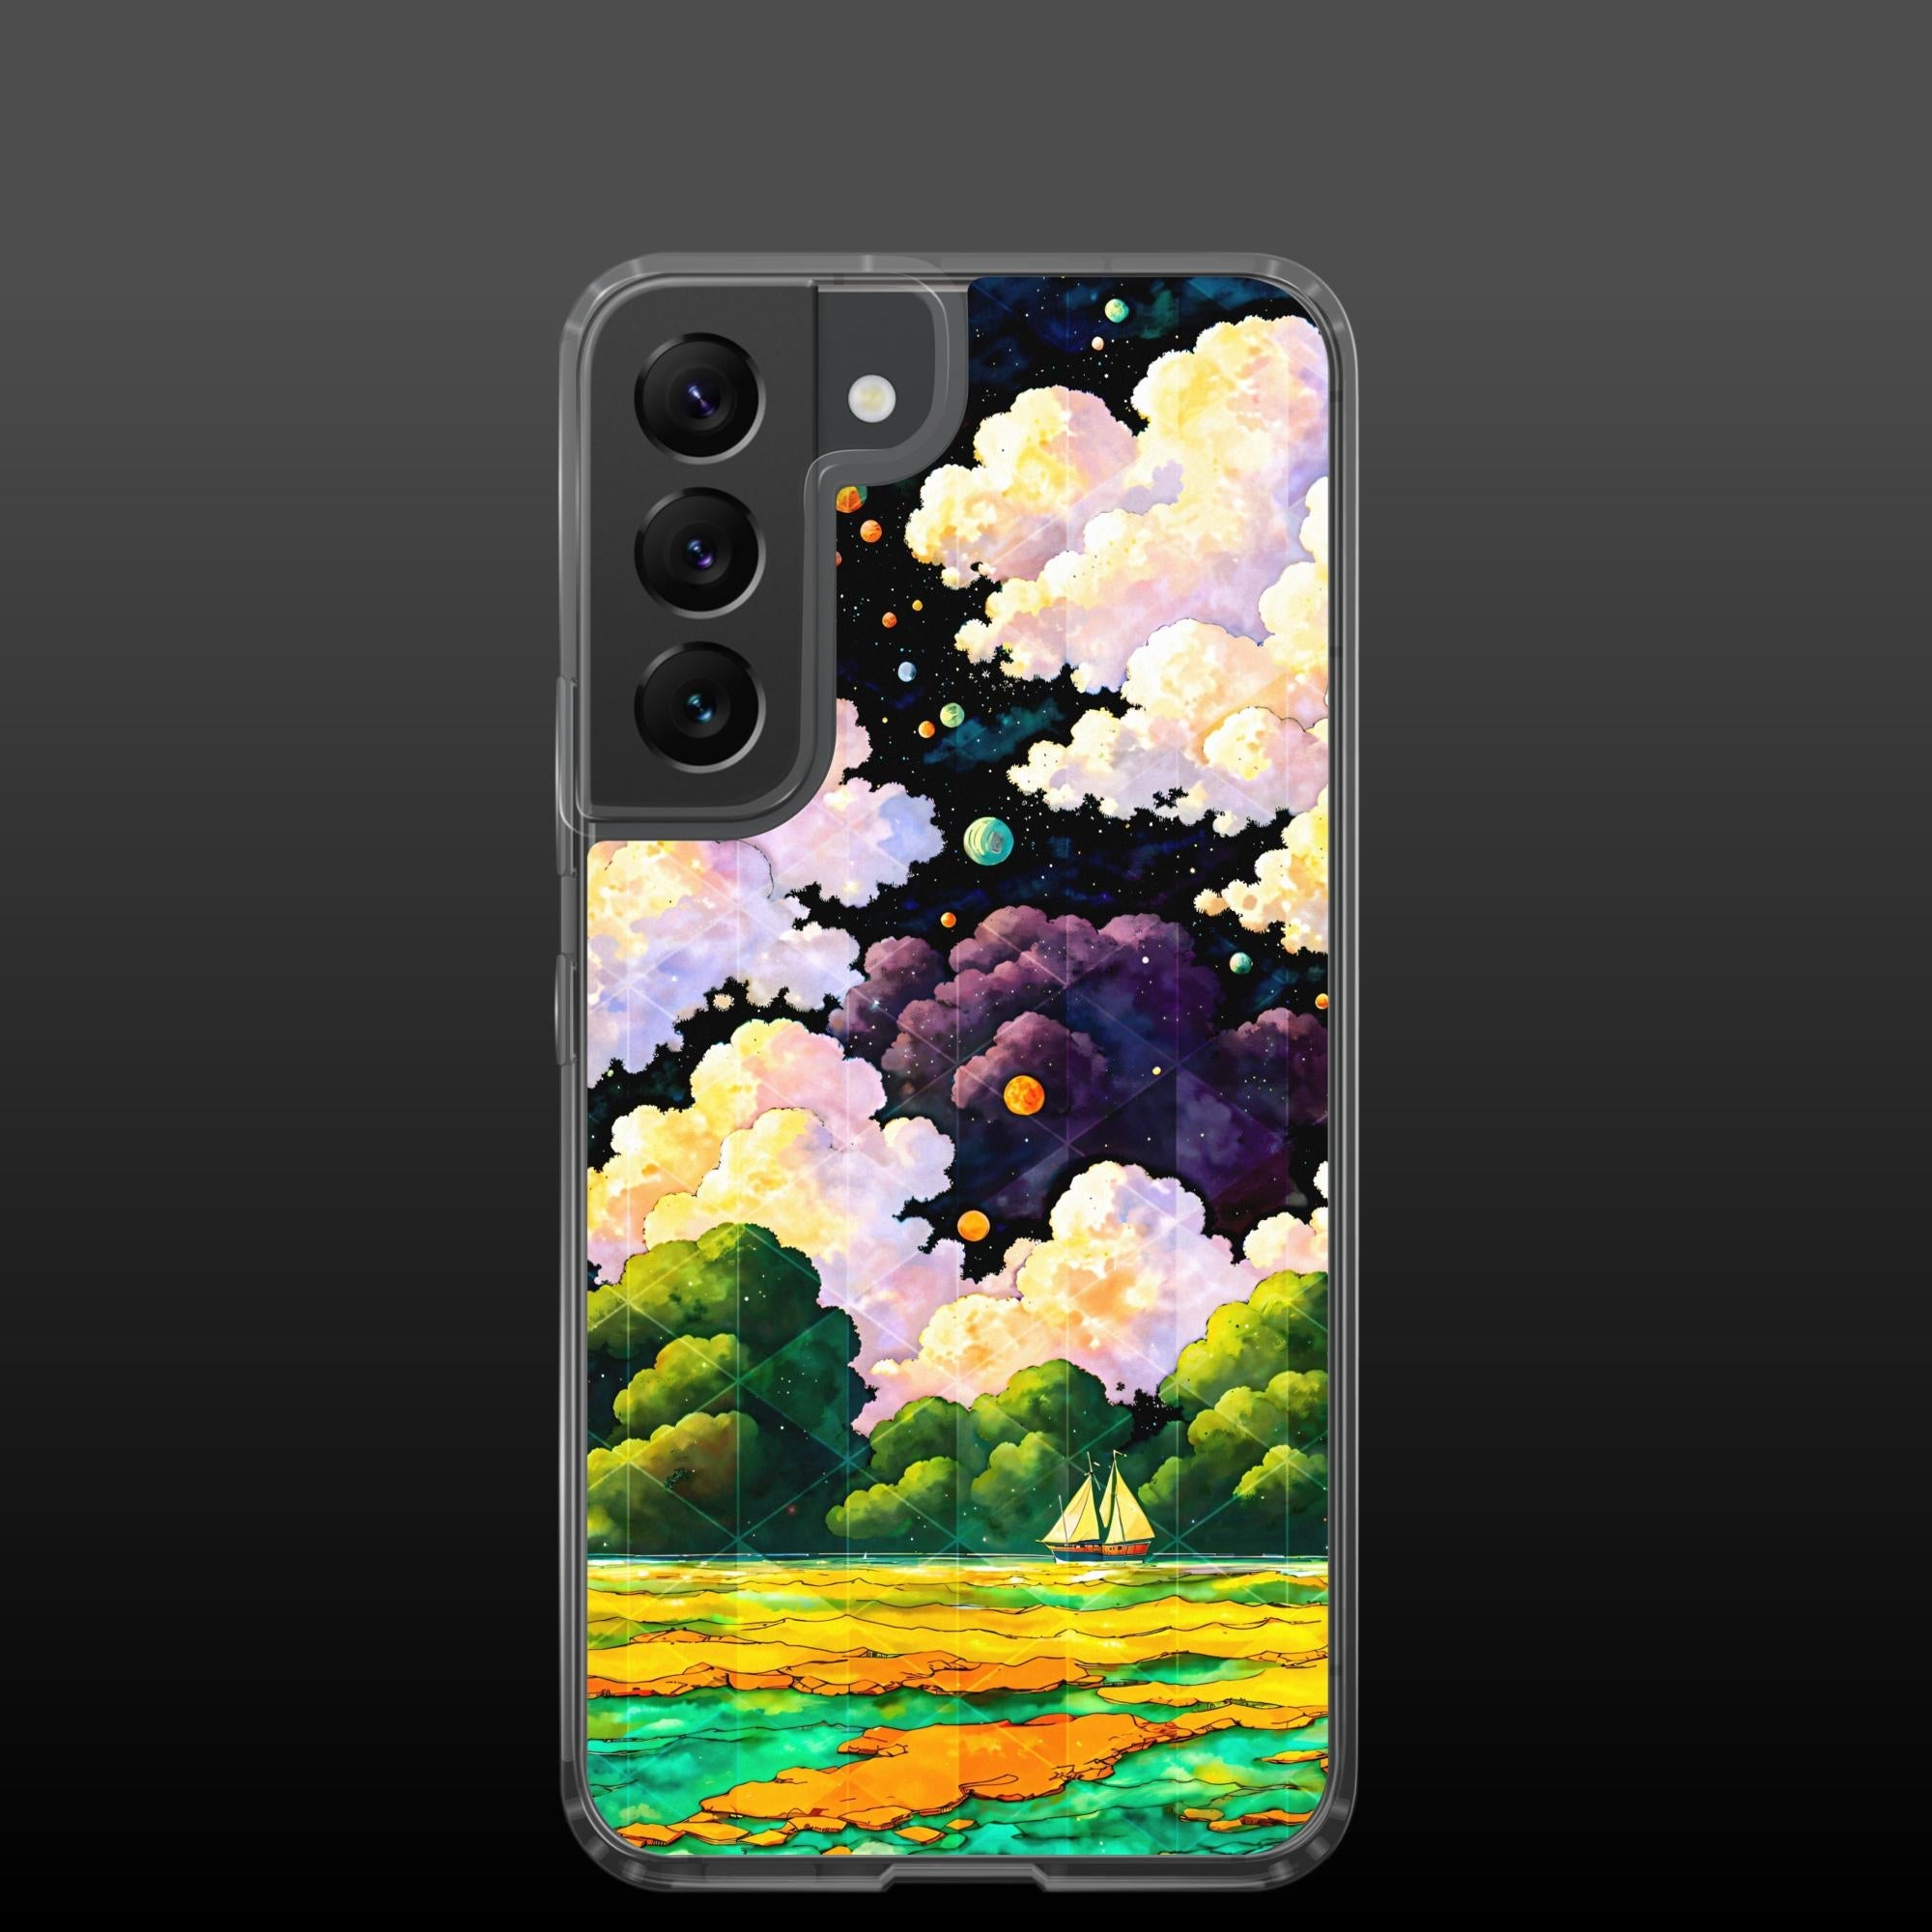 "Horizon quest" clear samsung case - Clear samsung case - Ever colorful